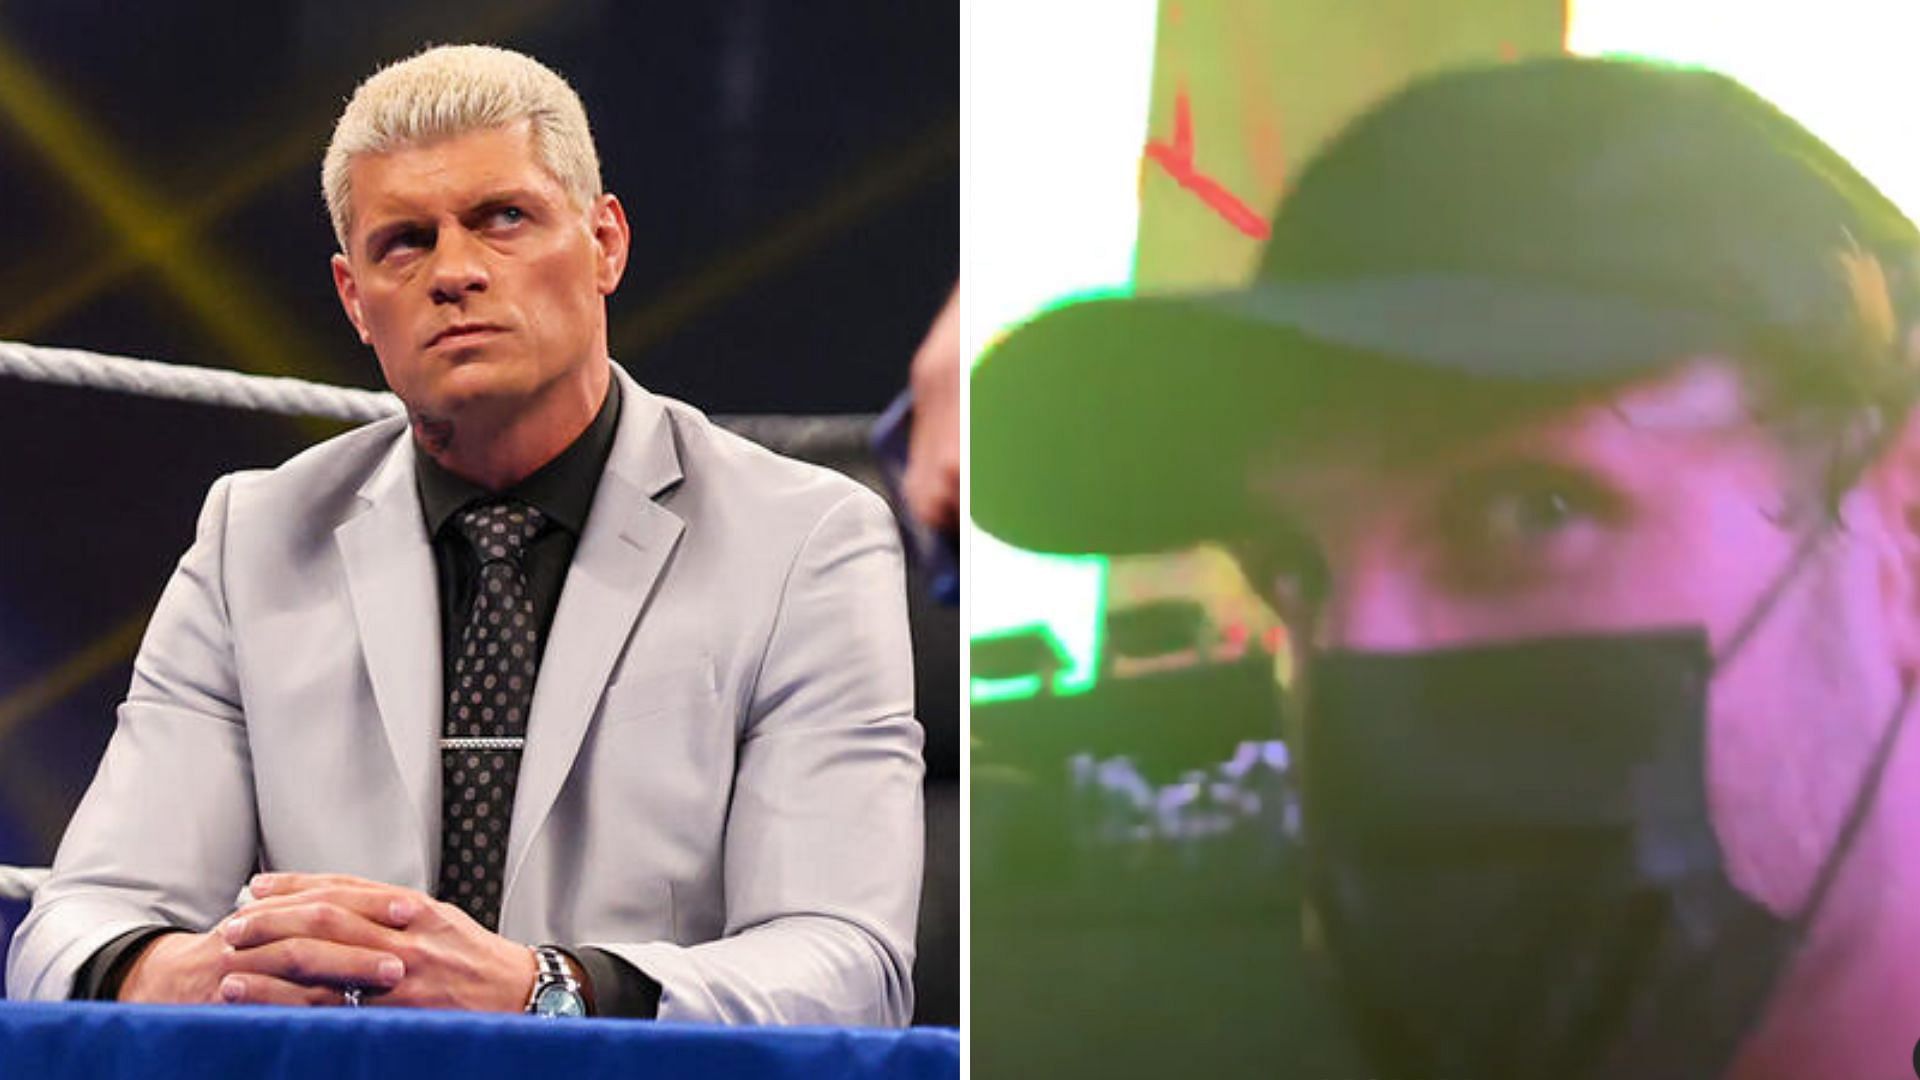 Cody Rhodes is set to face Logan Paul at 2024 King of the Ring [Image credits: wwe.com and Logan